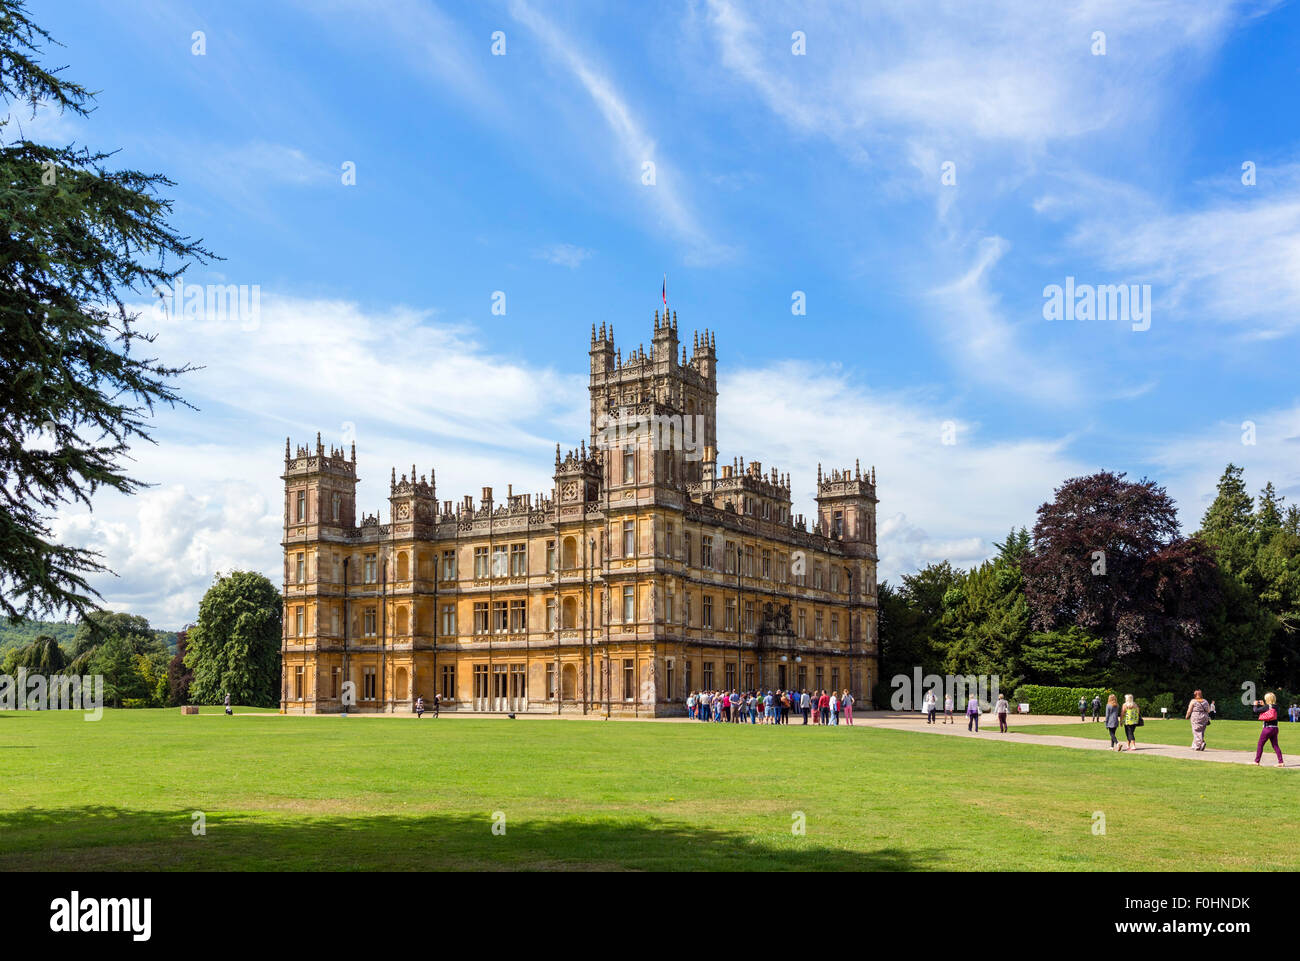 Tourists queuing to get into Highclere Castle, Downton Abbey in the TV series of the same name, Hampshire, England, UK Stock Photo